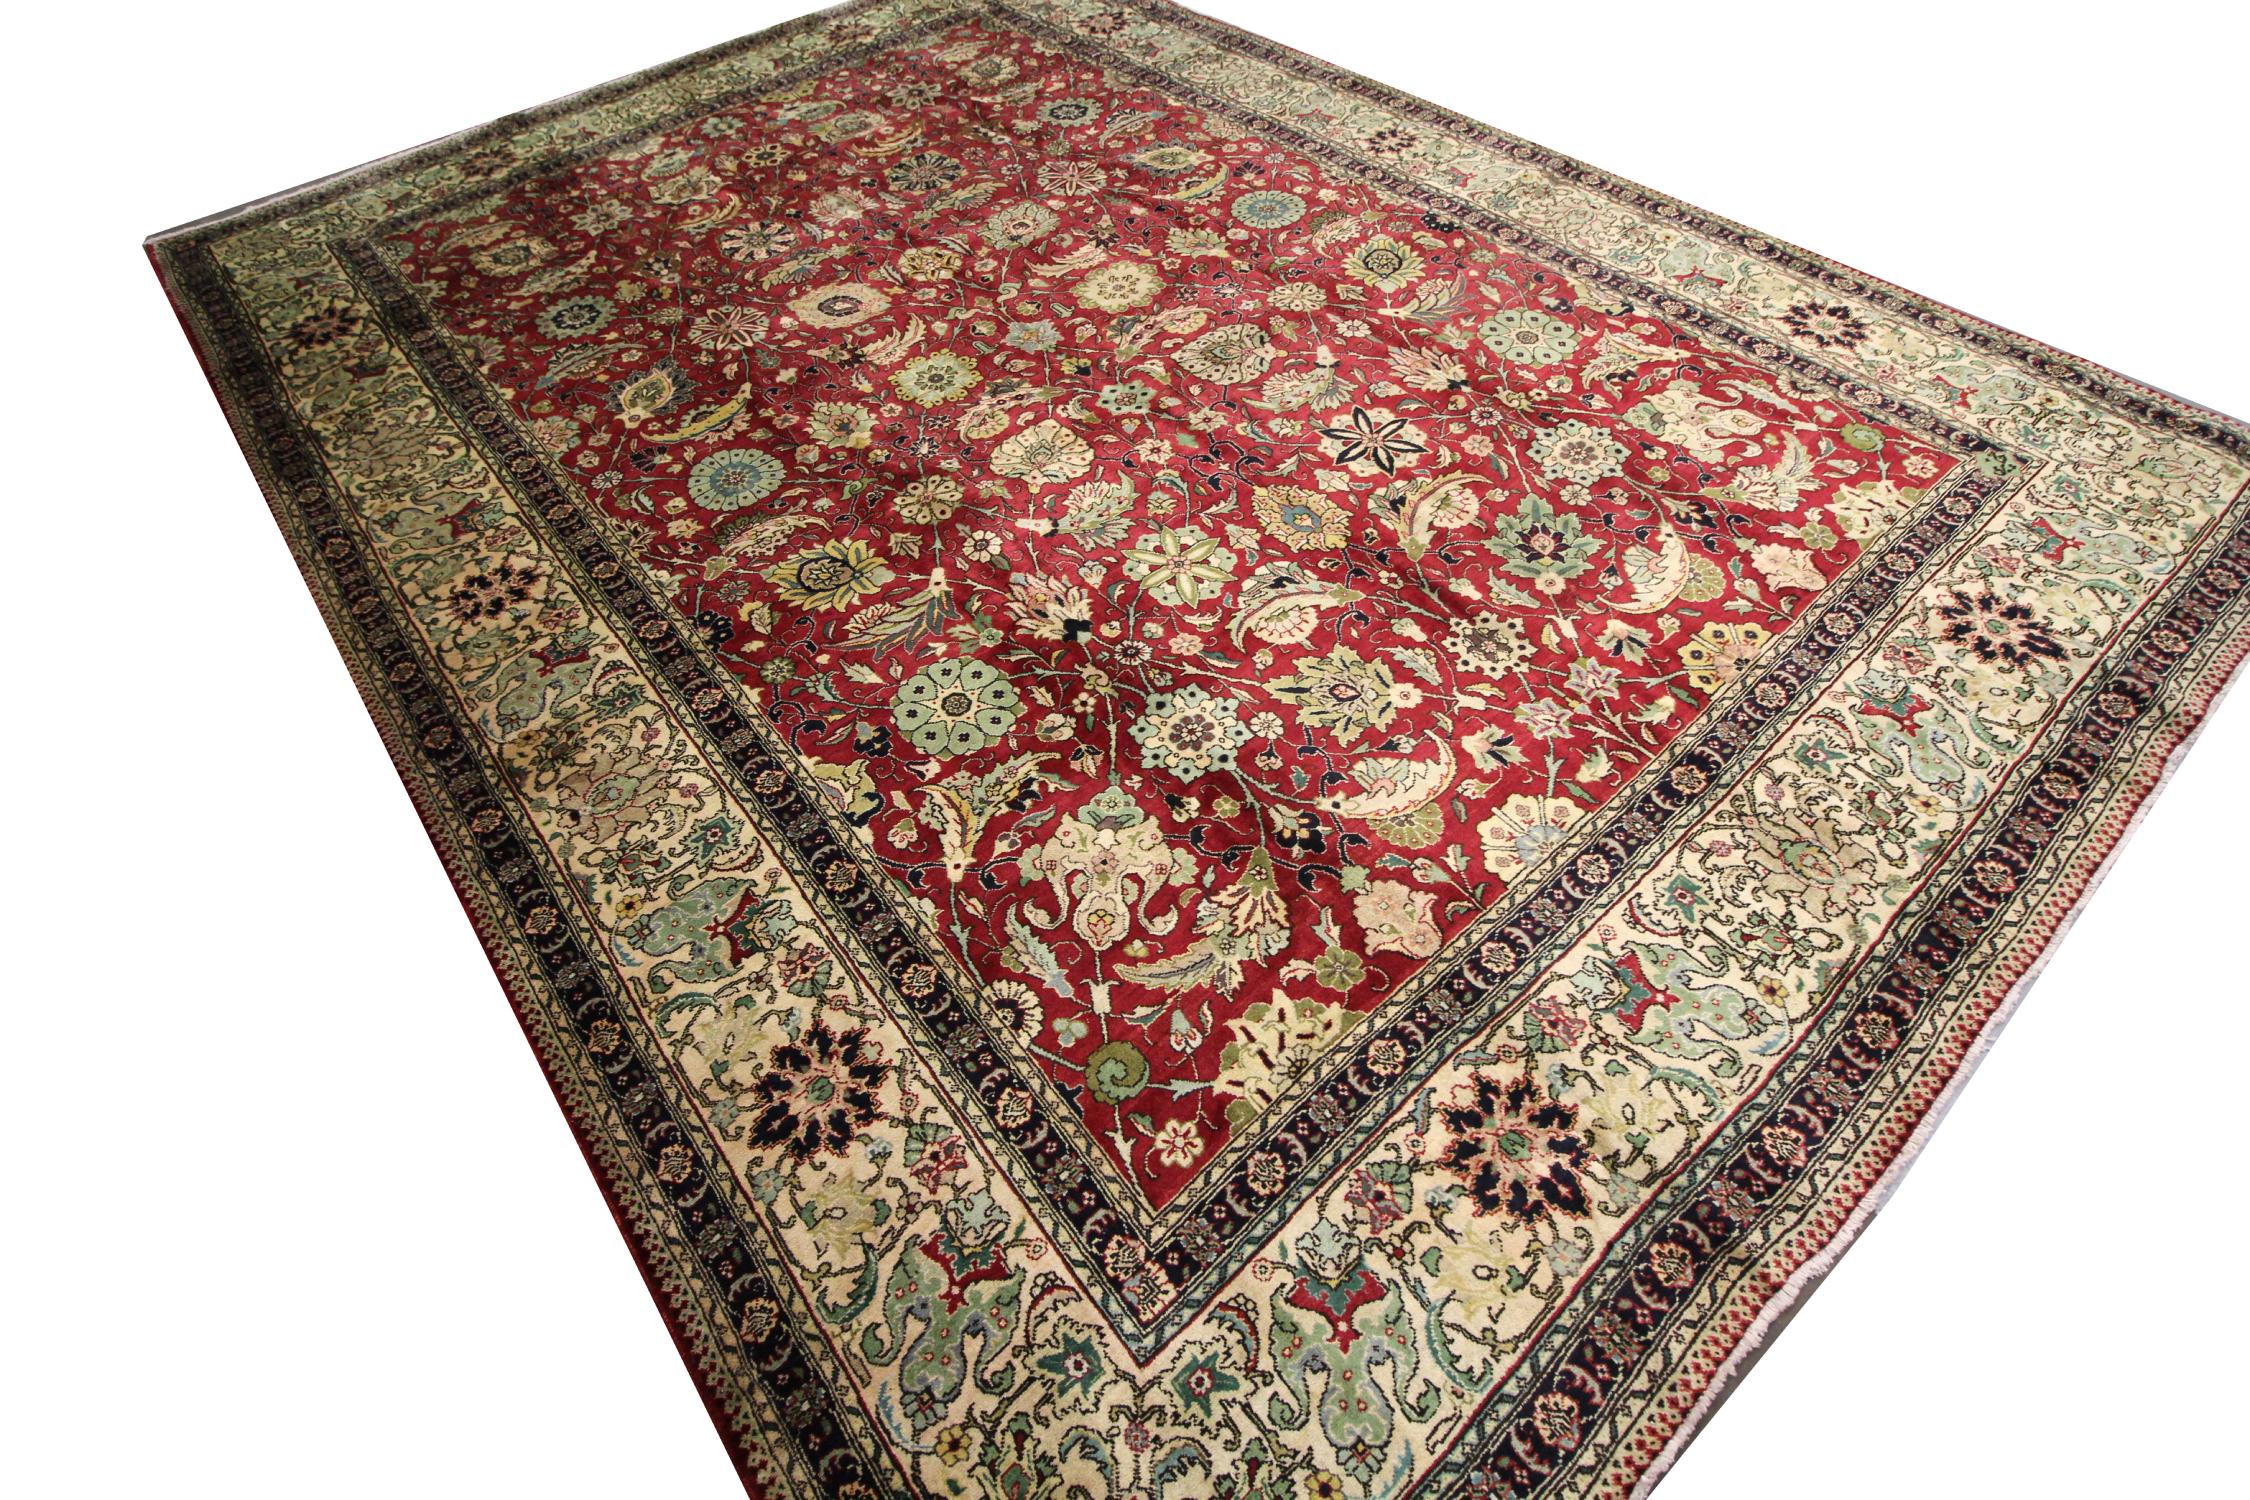 Faithful to the style of many stunning Turkish large rugs, this Oriental rug masterpiece, which features an antique rugs design. The floral rug combines vibrant colours with elegantly flowing floral motifs to create a sophisticated surface that can